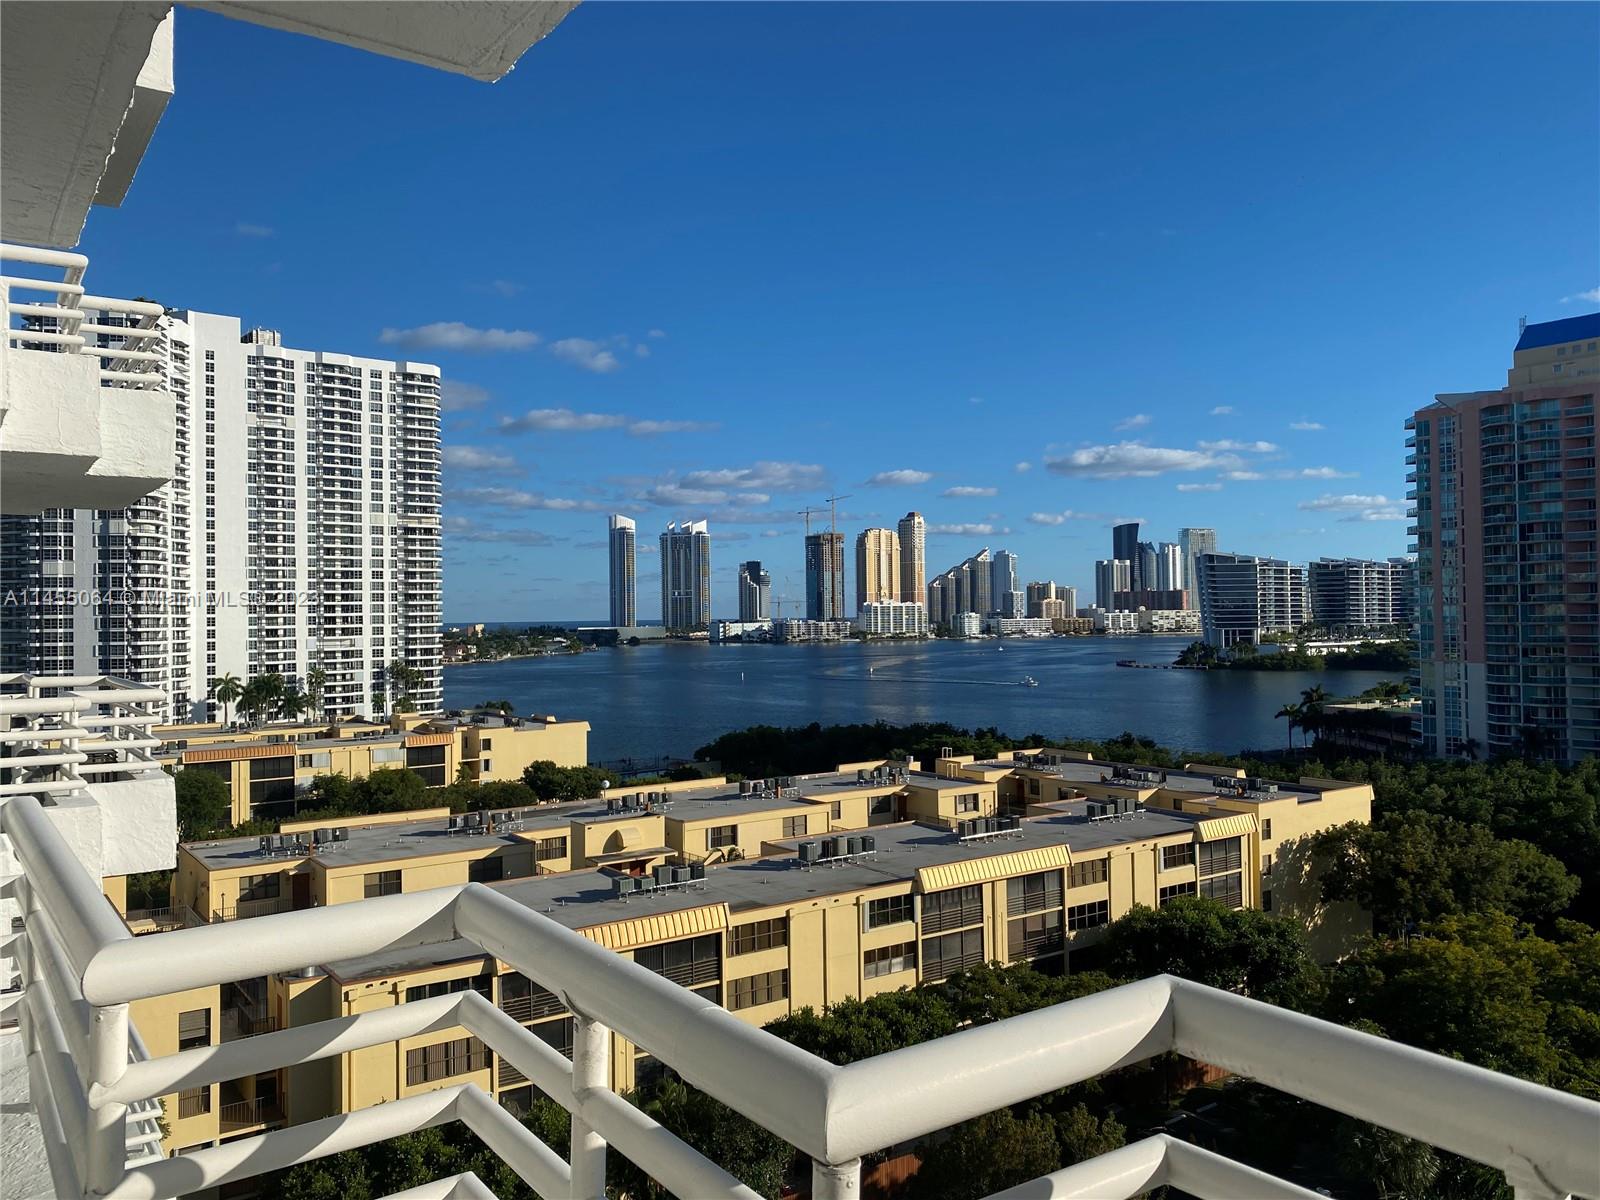 Gorgeous, super spacious 2 bed/2 bath in Aventura! This unit offers a split floor plan, large master bedroom with 2 separate closets, master bath with 2 sinks, and 2 separate closets. 2nd bedroom next to another full bathroom. Washer and dryer in the unit. Amazing water view from private balcony, overlooking intracoastal and ocean. Recently remodeled building with 24 hour attended lobby, 2 pools, volley ball court, jacuzzi, gym, playroom, convenience store, and much more! 5 min away from Aventura Mall, supermarket, coffee places, the beach, etc. Easy to show, please see brokers remarks. Basic Cable, basic internet included on the rent.